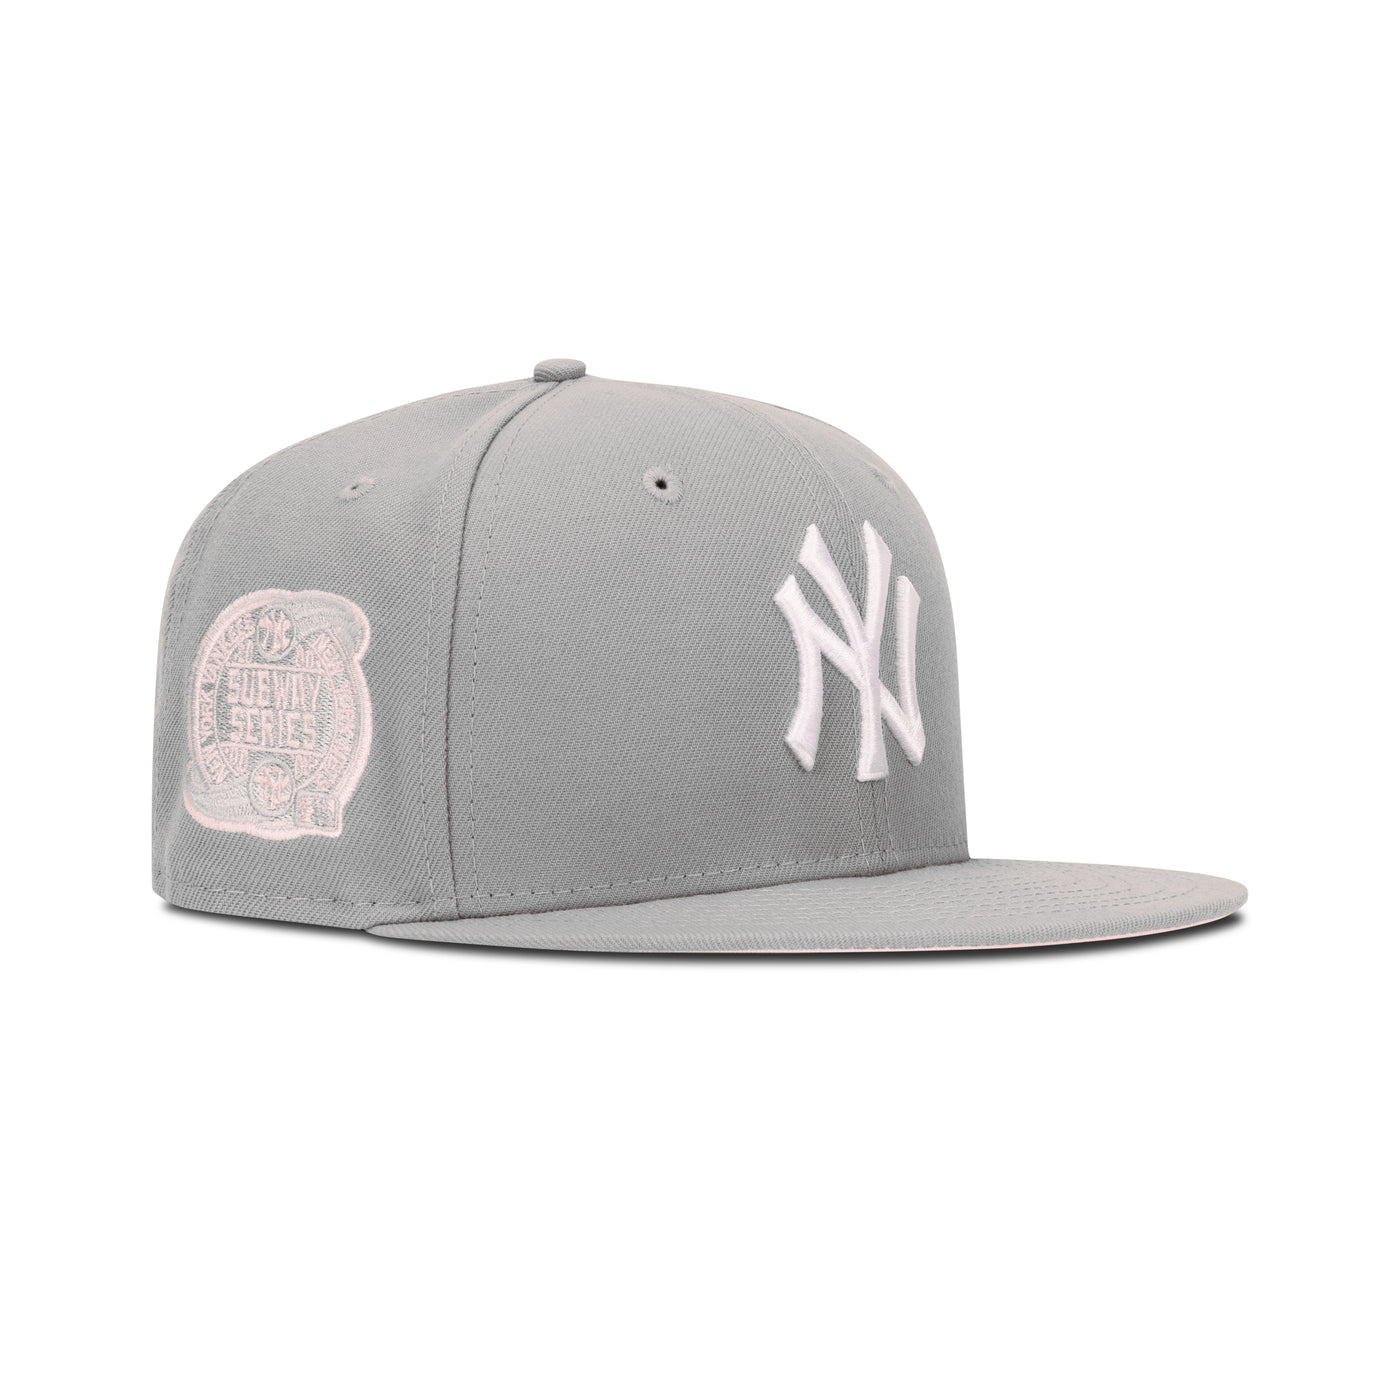 Grey Bottom Fitted Hats, Grey Brim Fitted Hats